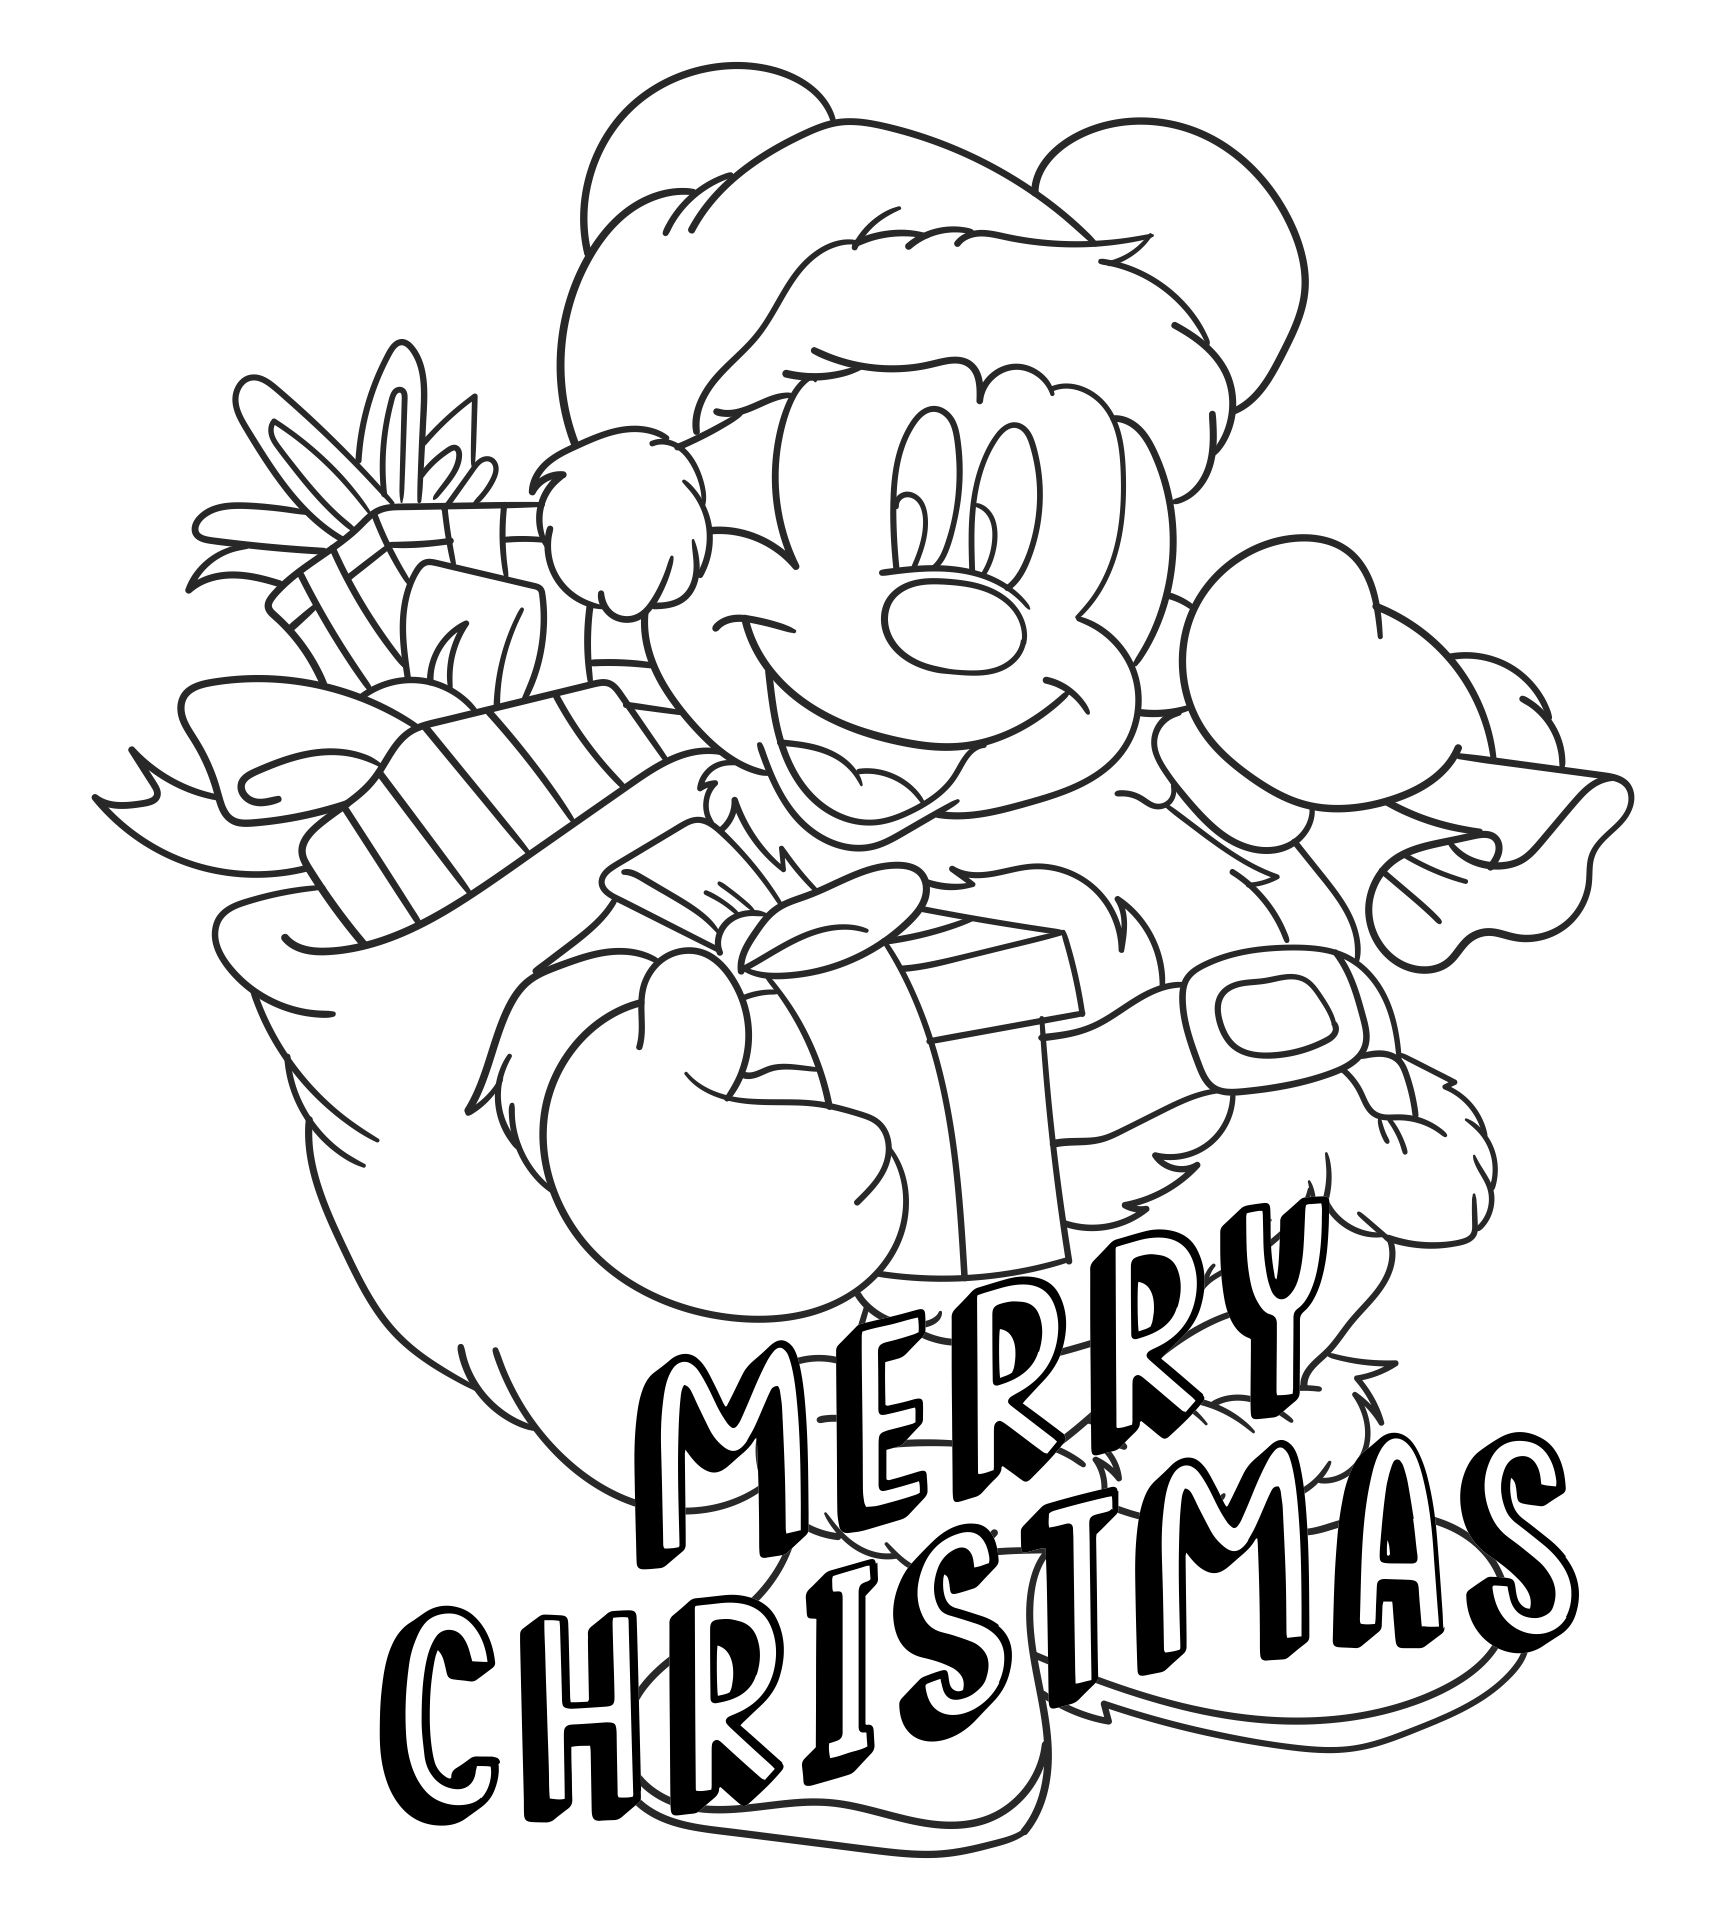 10-best-printable-christmas-coloring-sheets-disney-pdf-for-free-at